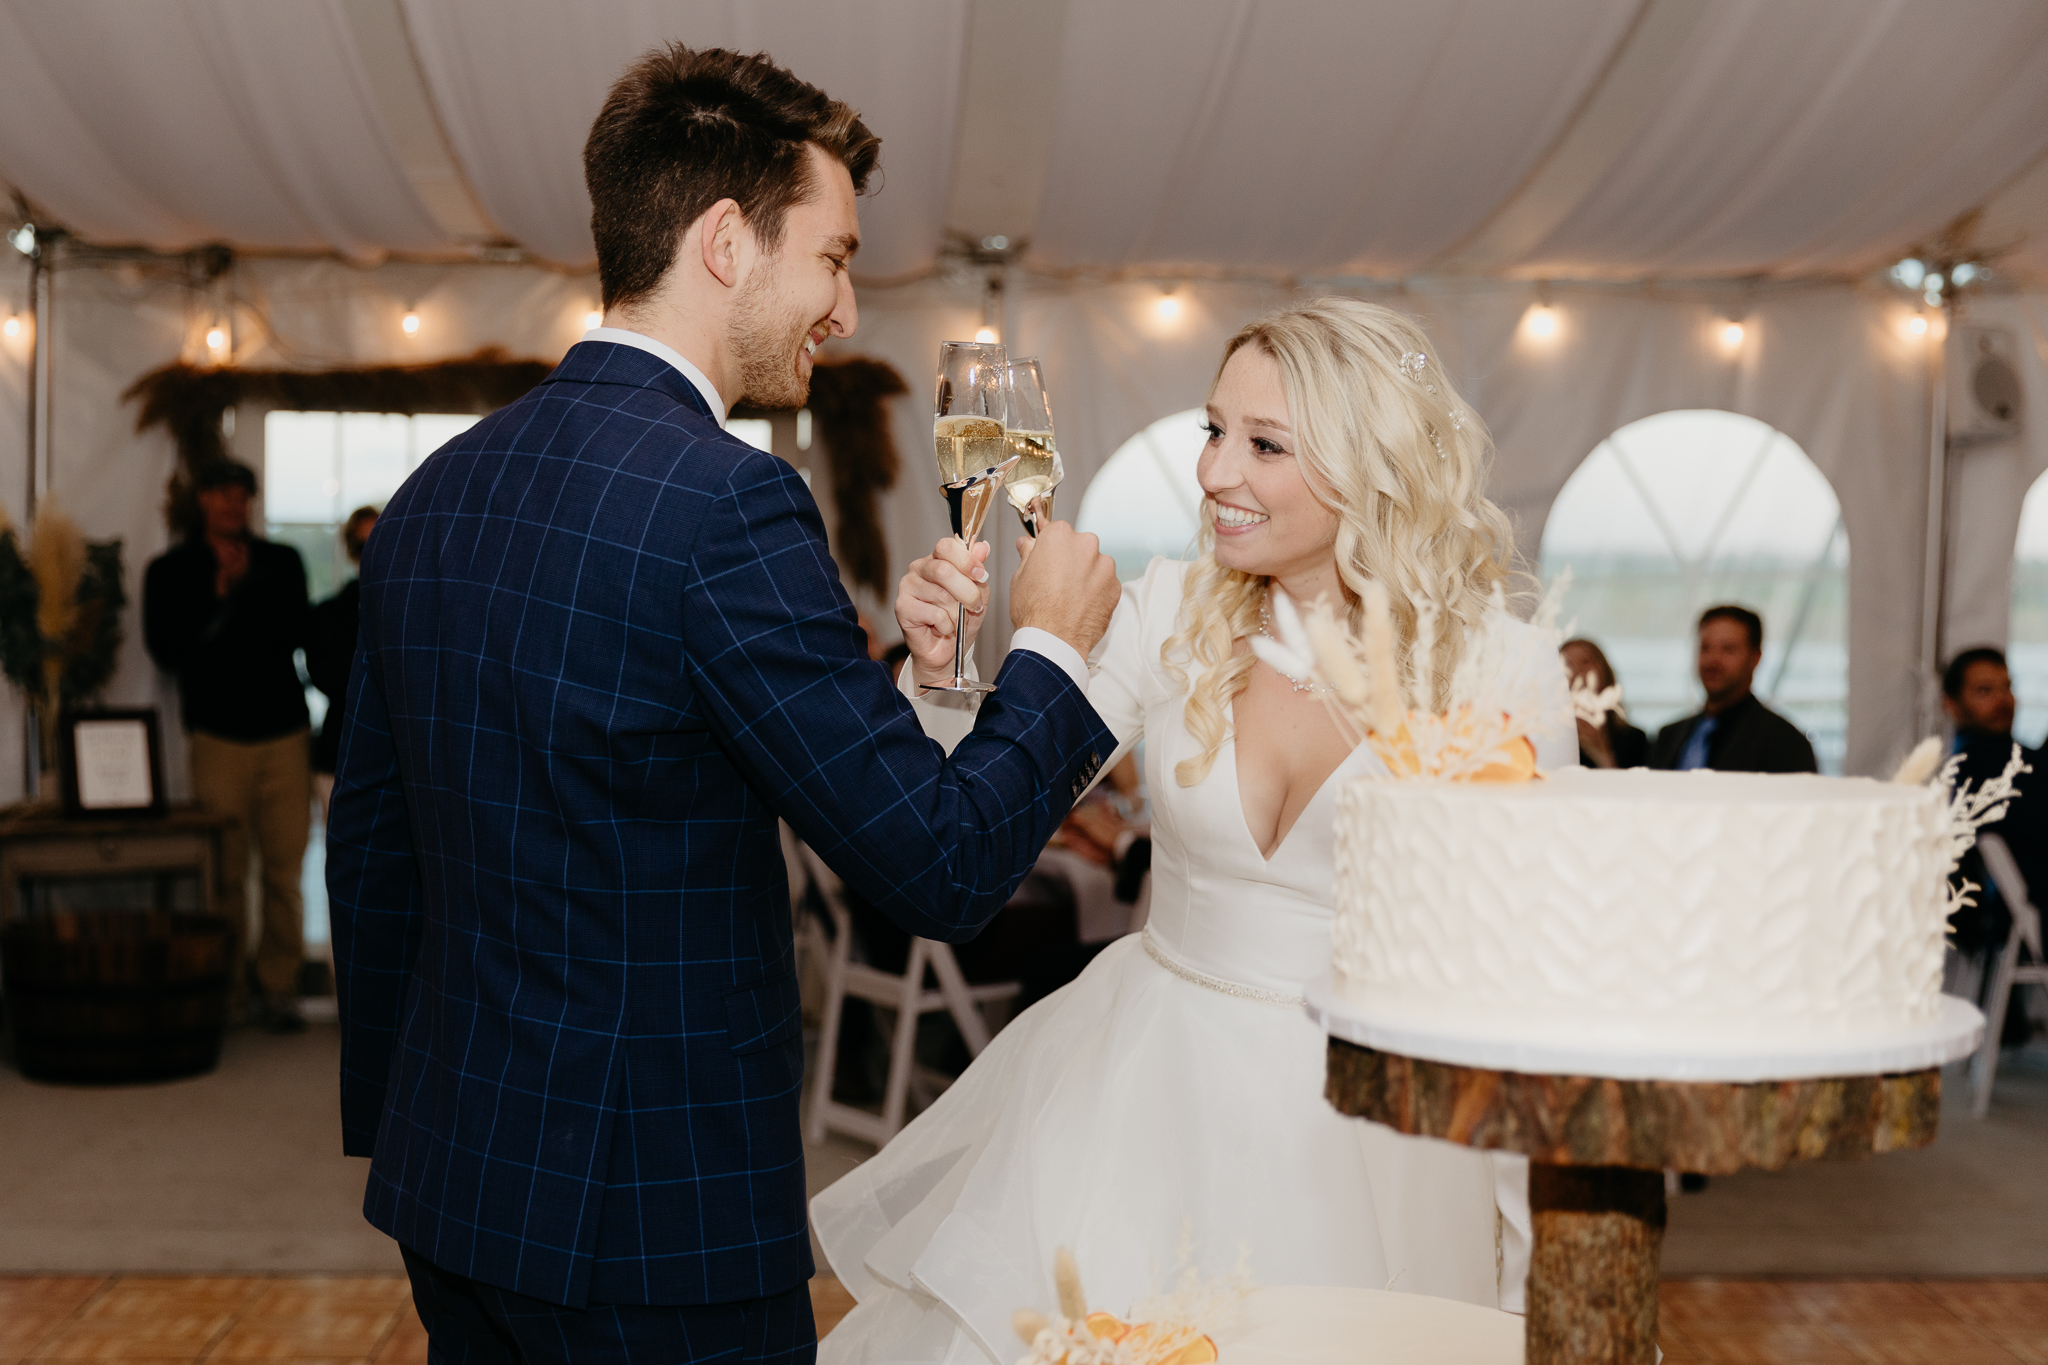 Bride and groom toast champagne in a white tent during their October wedding reception